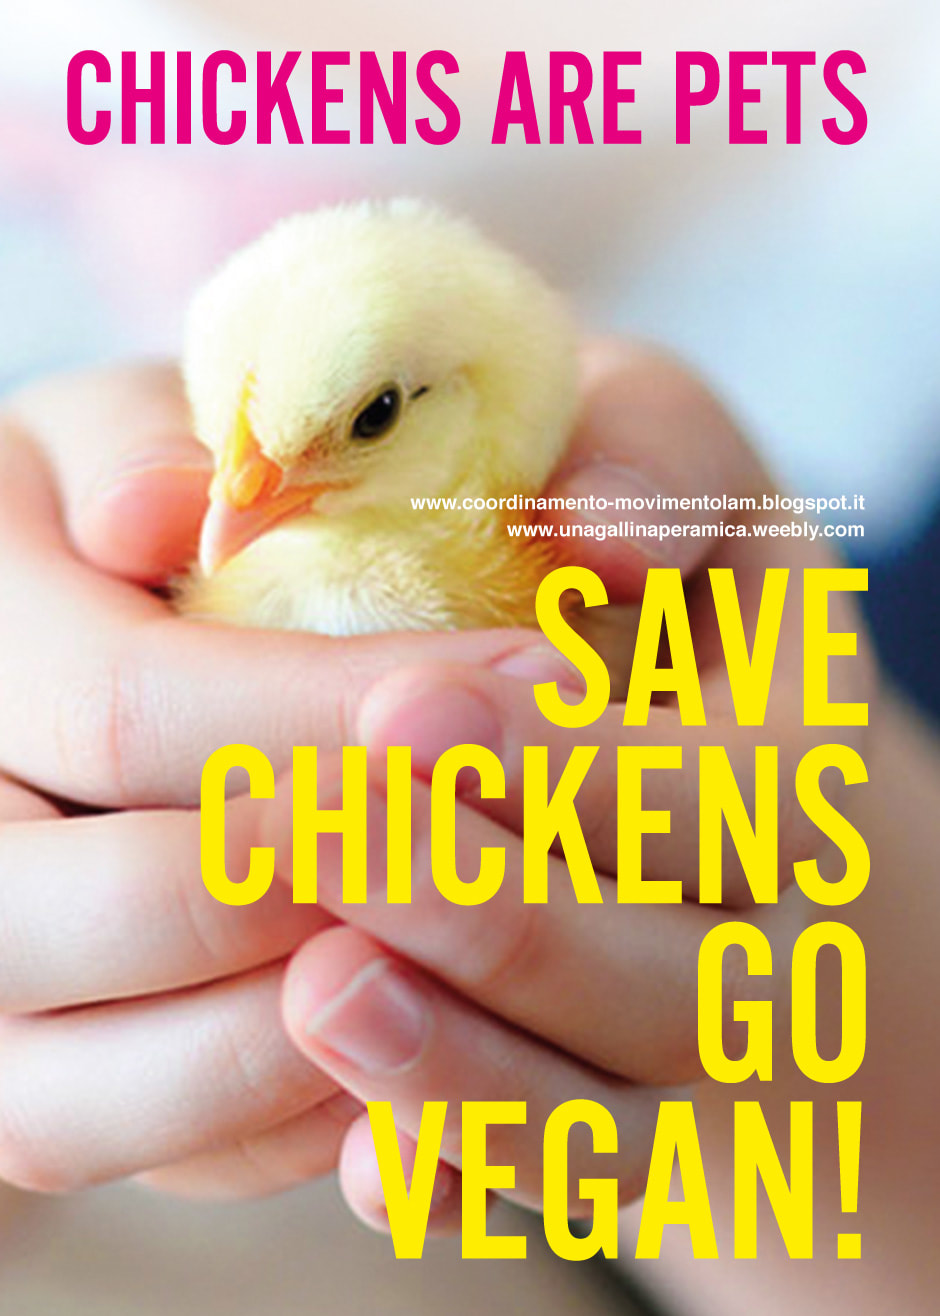 CHICKENS ARE PETS. GO VEGAN!